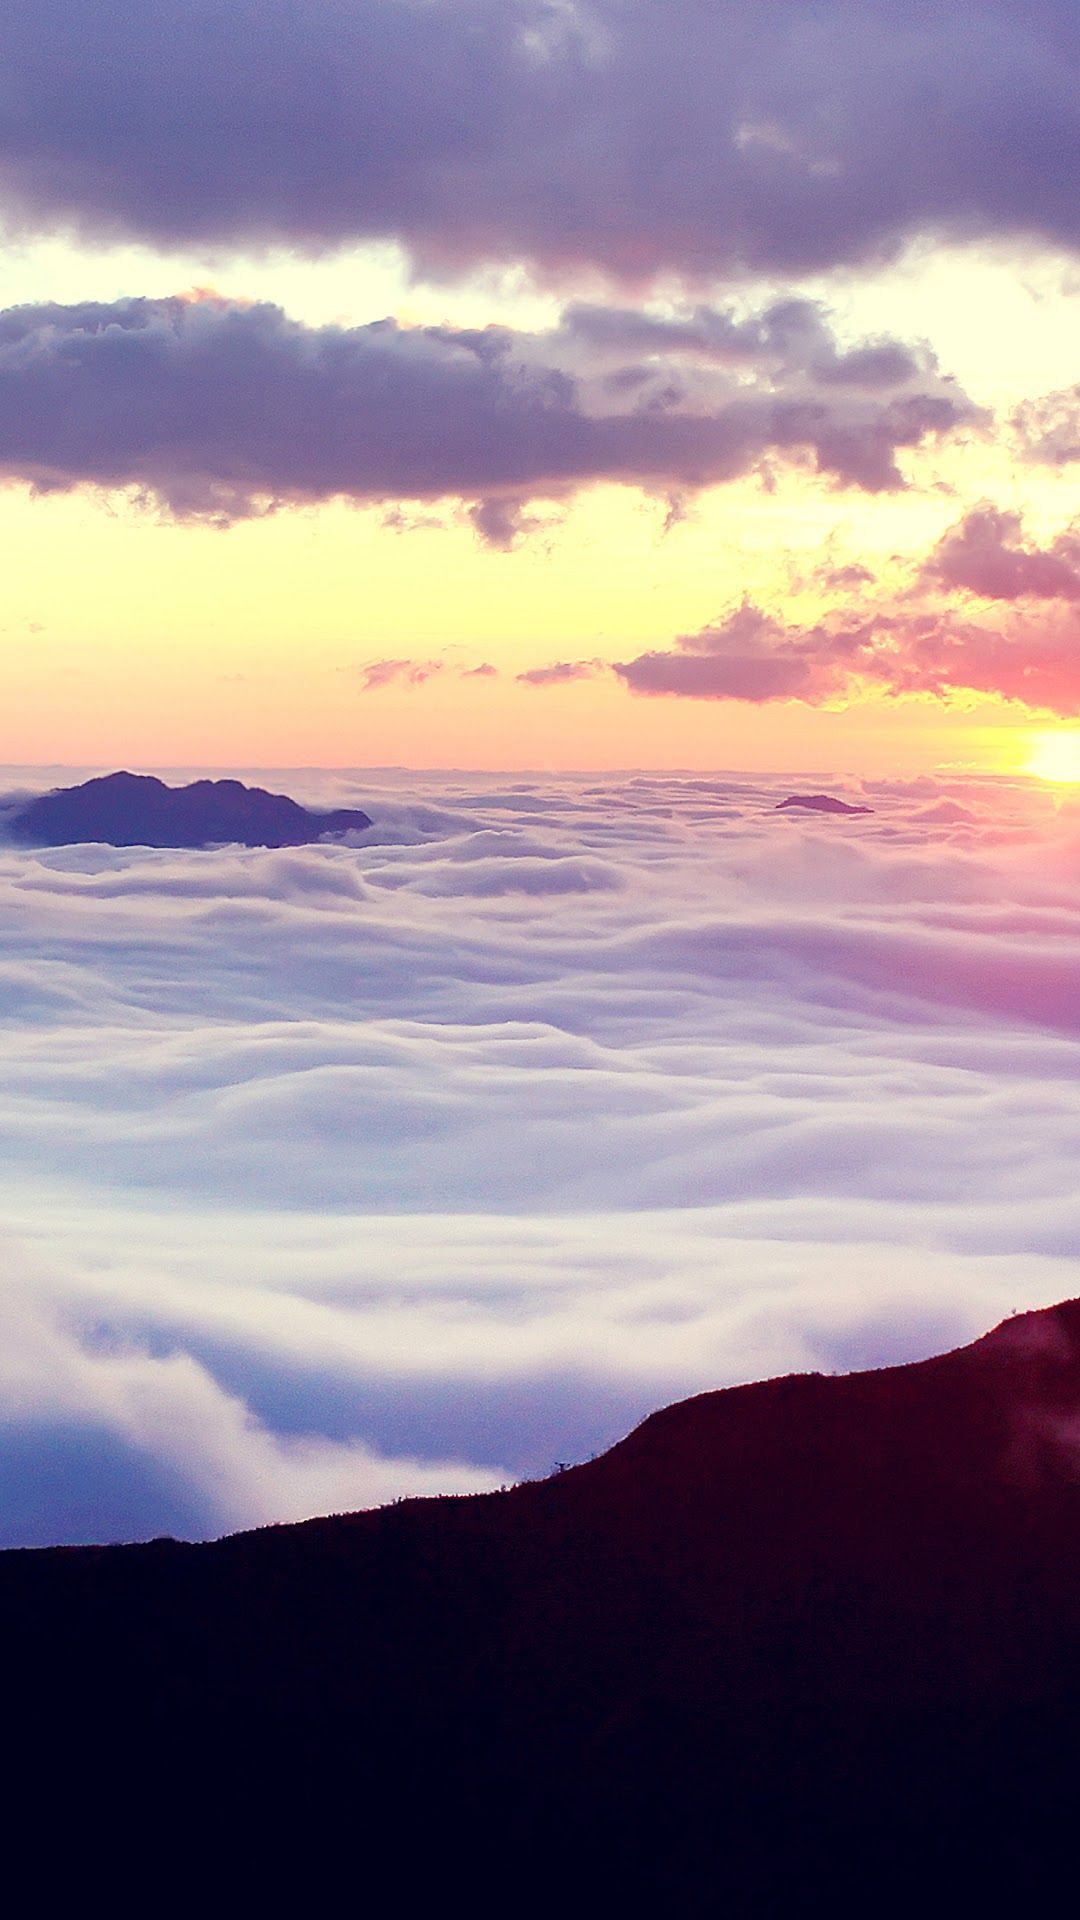 A sunset over the clouds and mountains - Sunrise